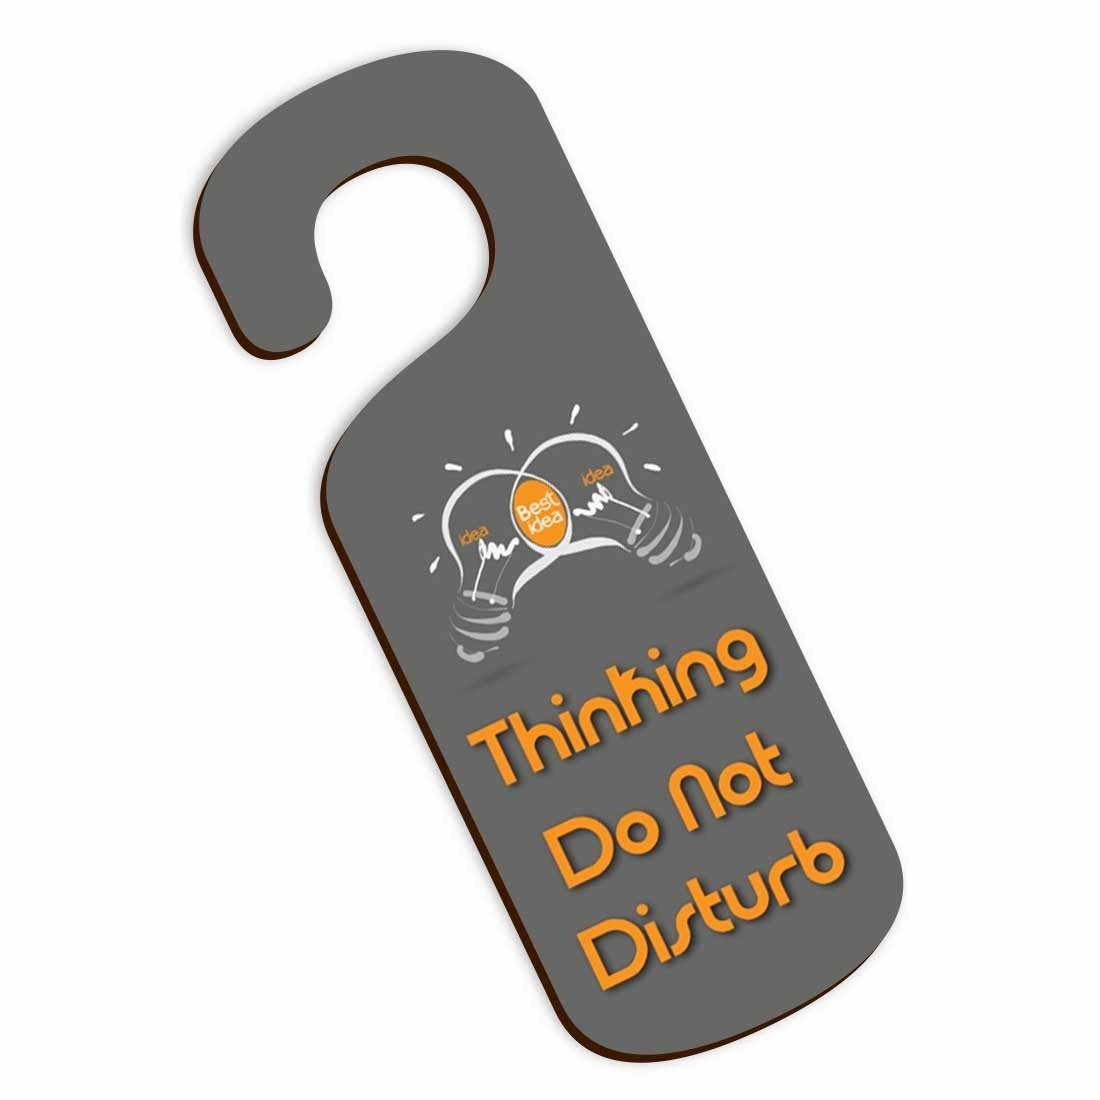 A door knob sign with the words &quot;Thinking, do not disturb&quot; written on it